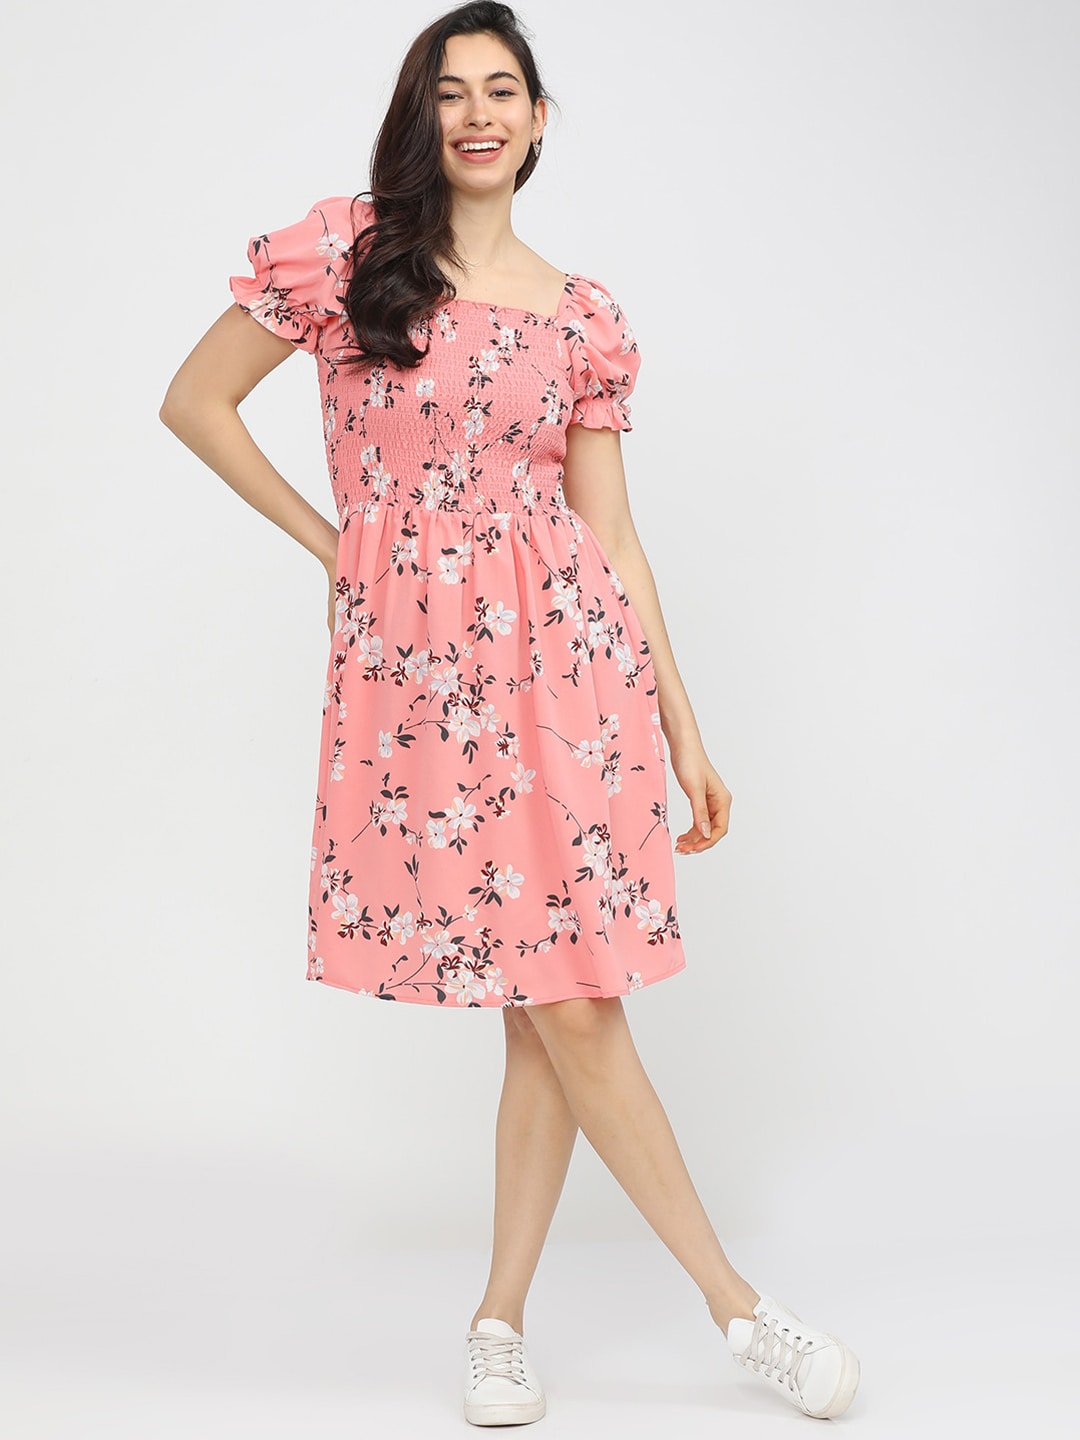 Tokyo Talkies Coral Pink & White Floral Dress Price in India